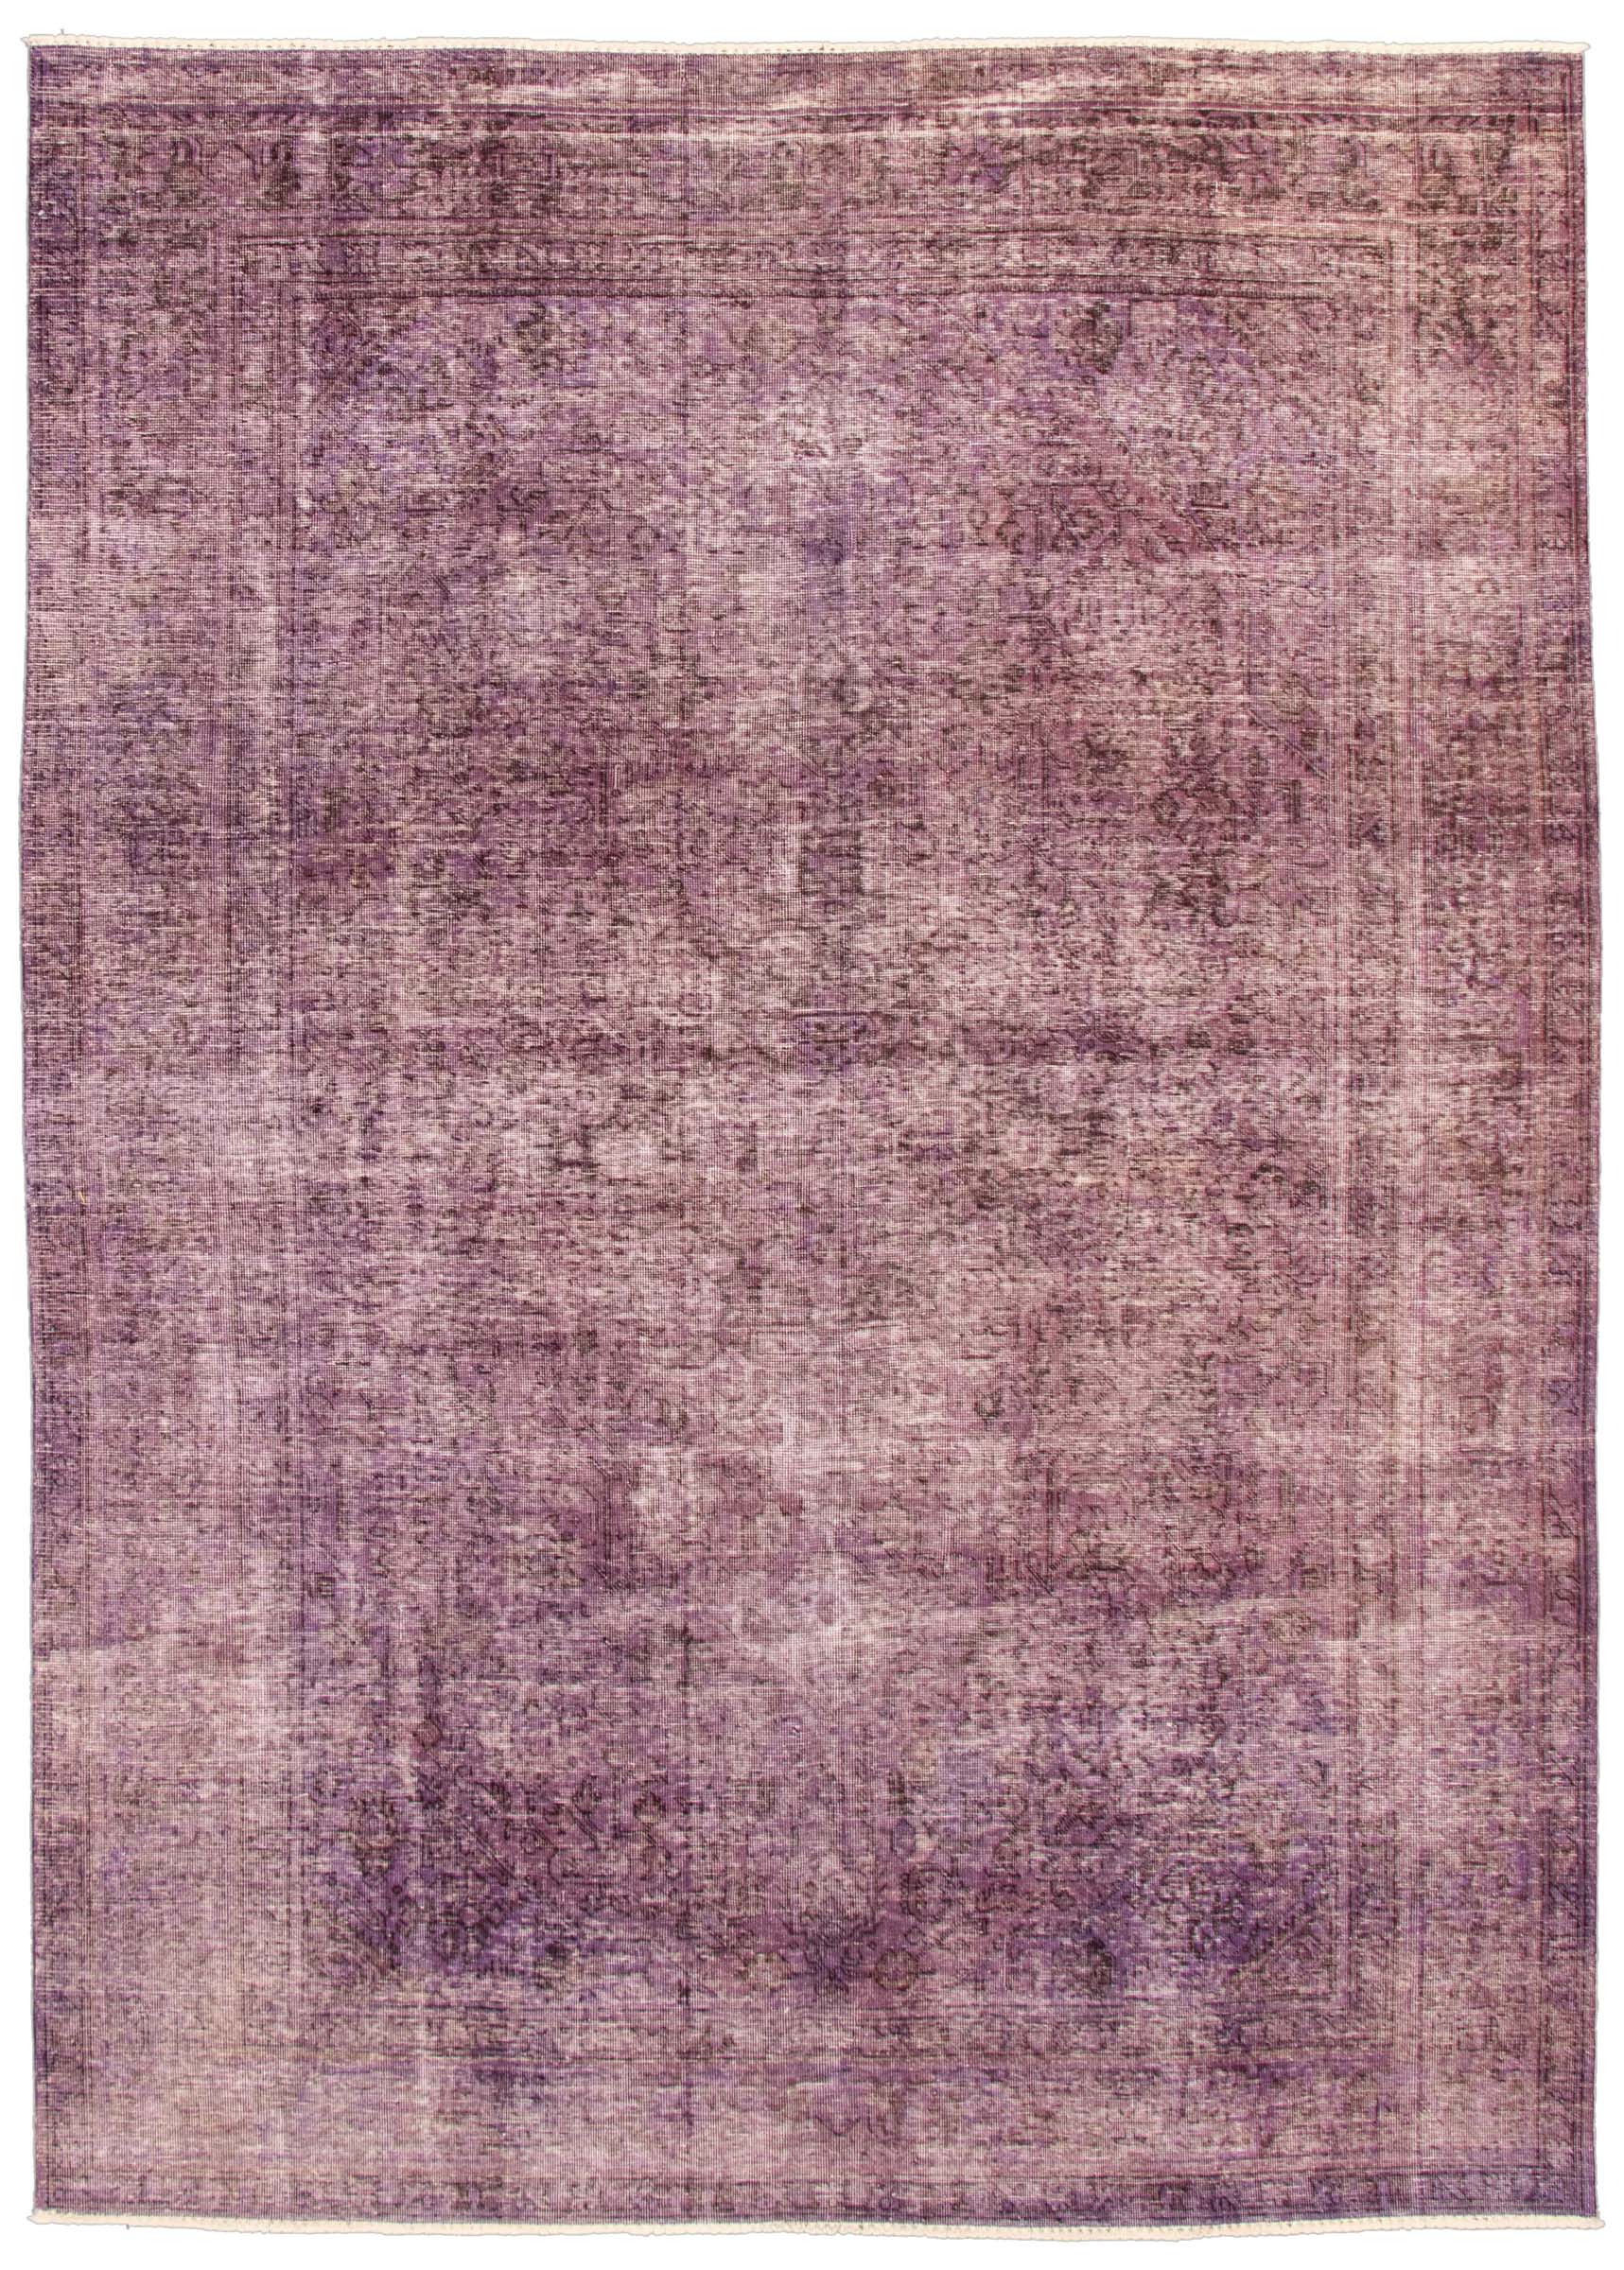 Hand-knotted Color Transition Purple Wool Rug 8'0" x 11'4" Size: 8'0" x 11'4"  